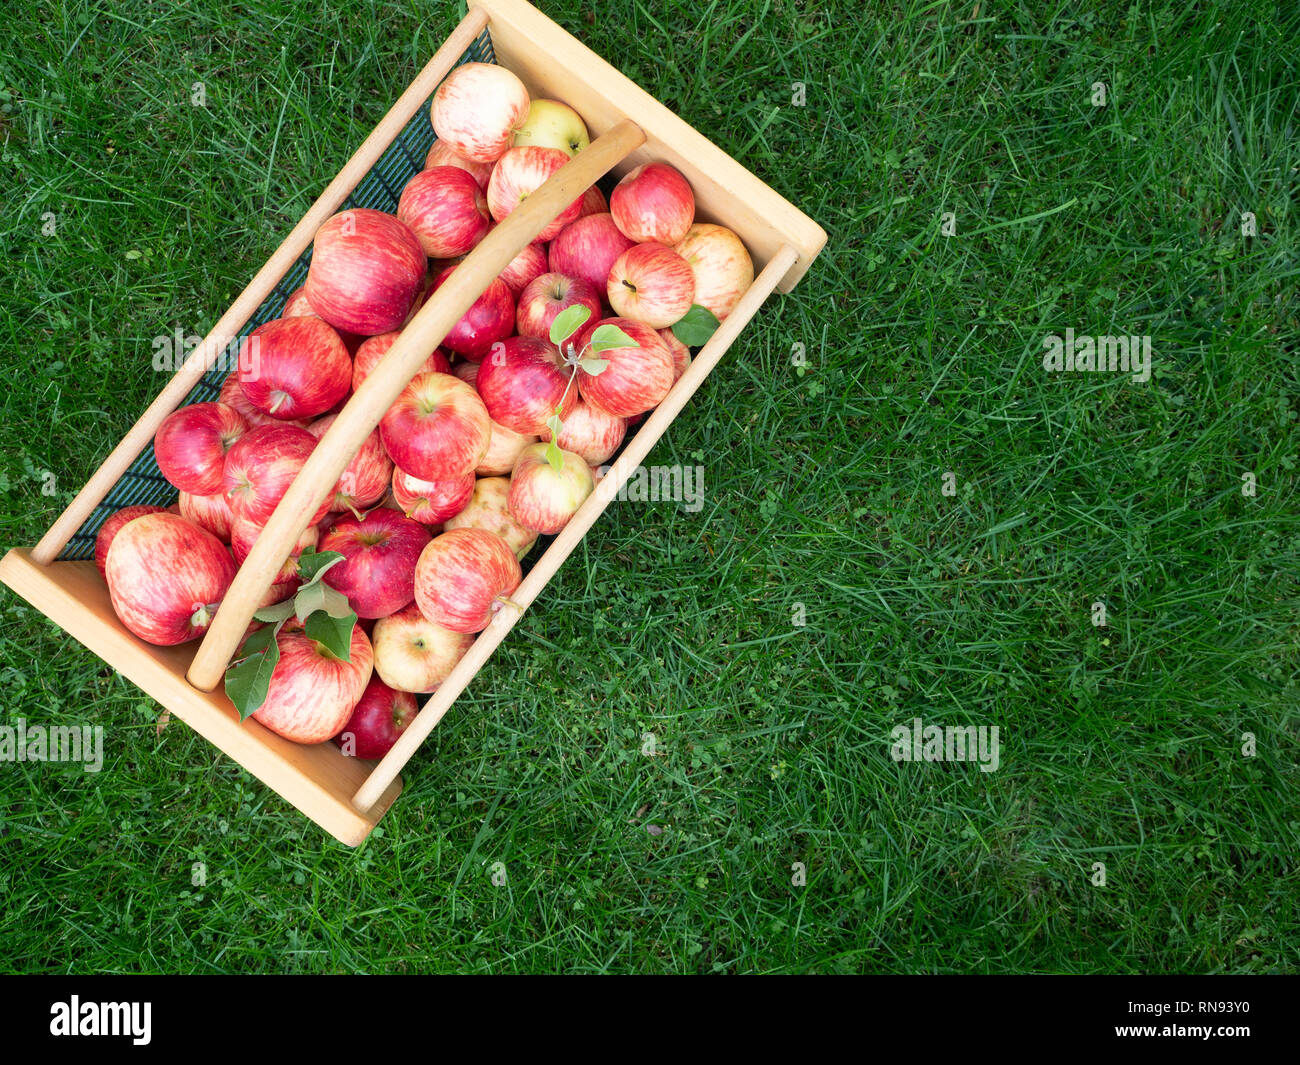 Wood and wire basket with ripe, freshly picked apples sitting on lush green grass. Photographed from above with basket at an angle. Stock Photo